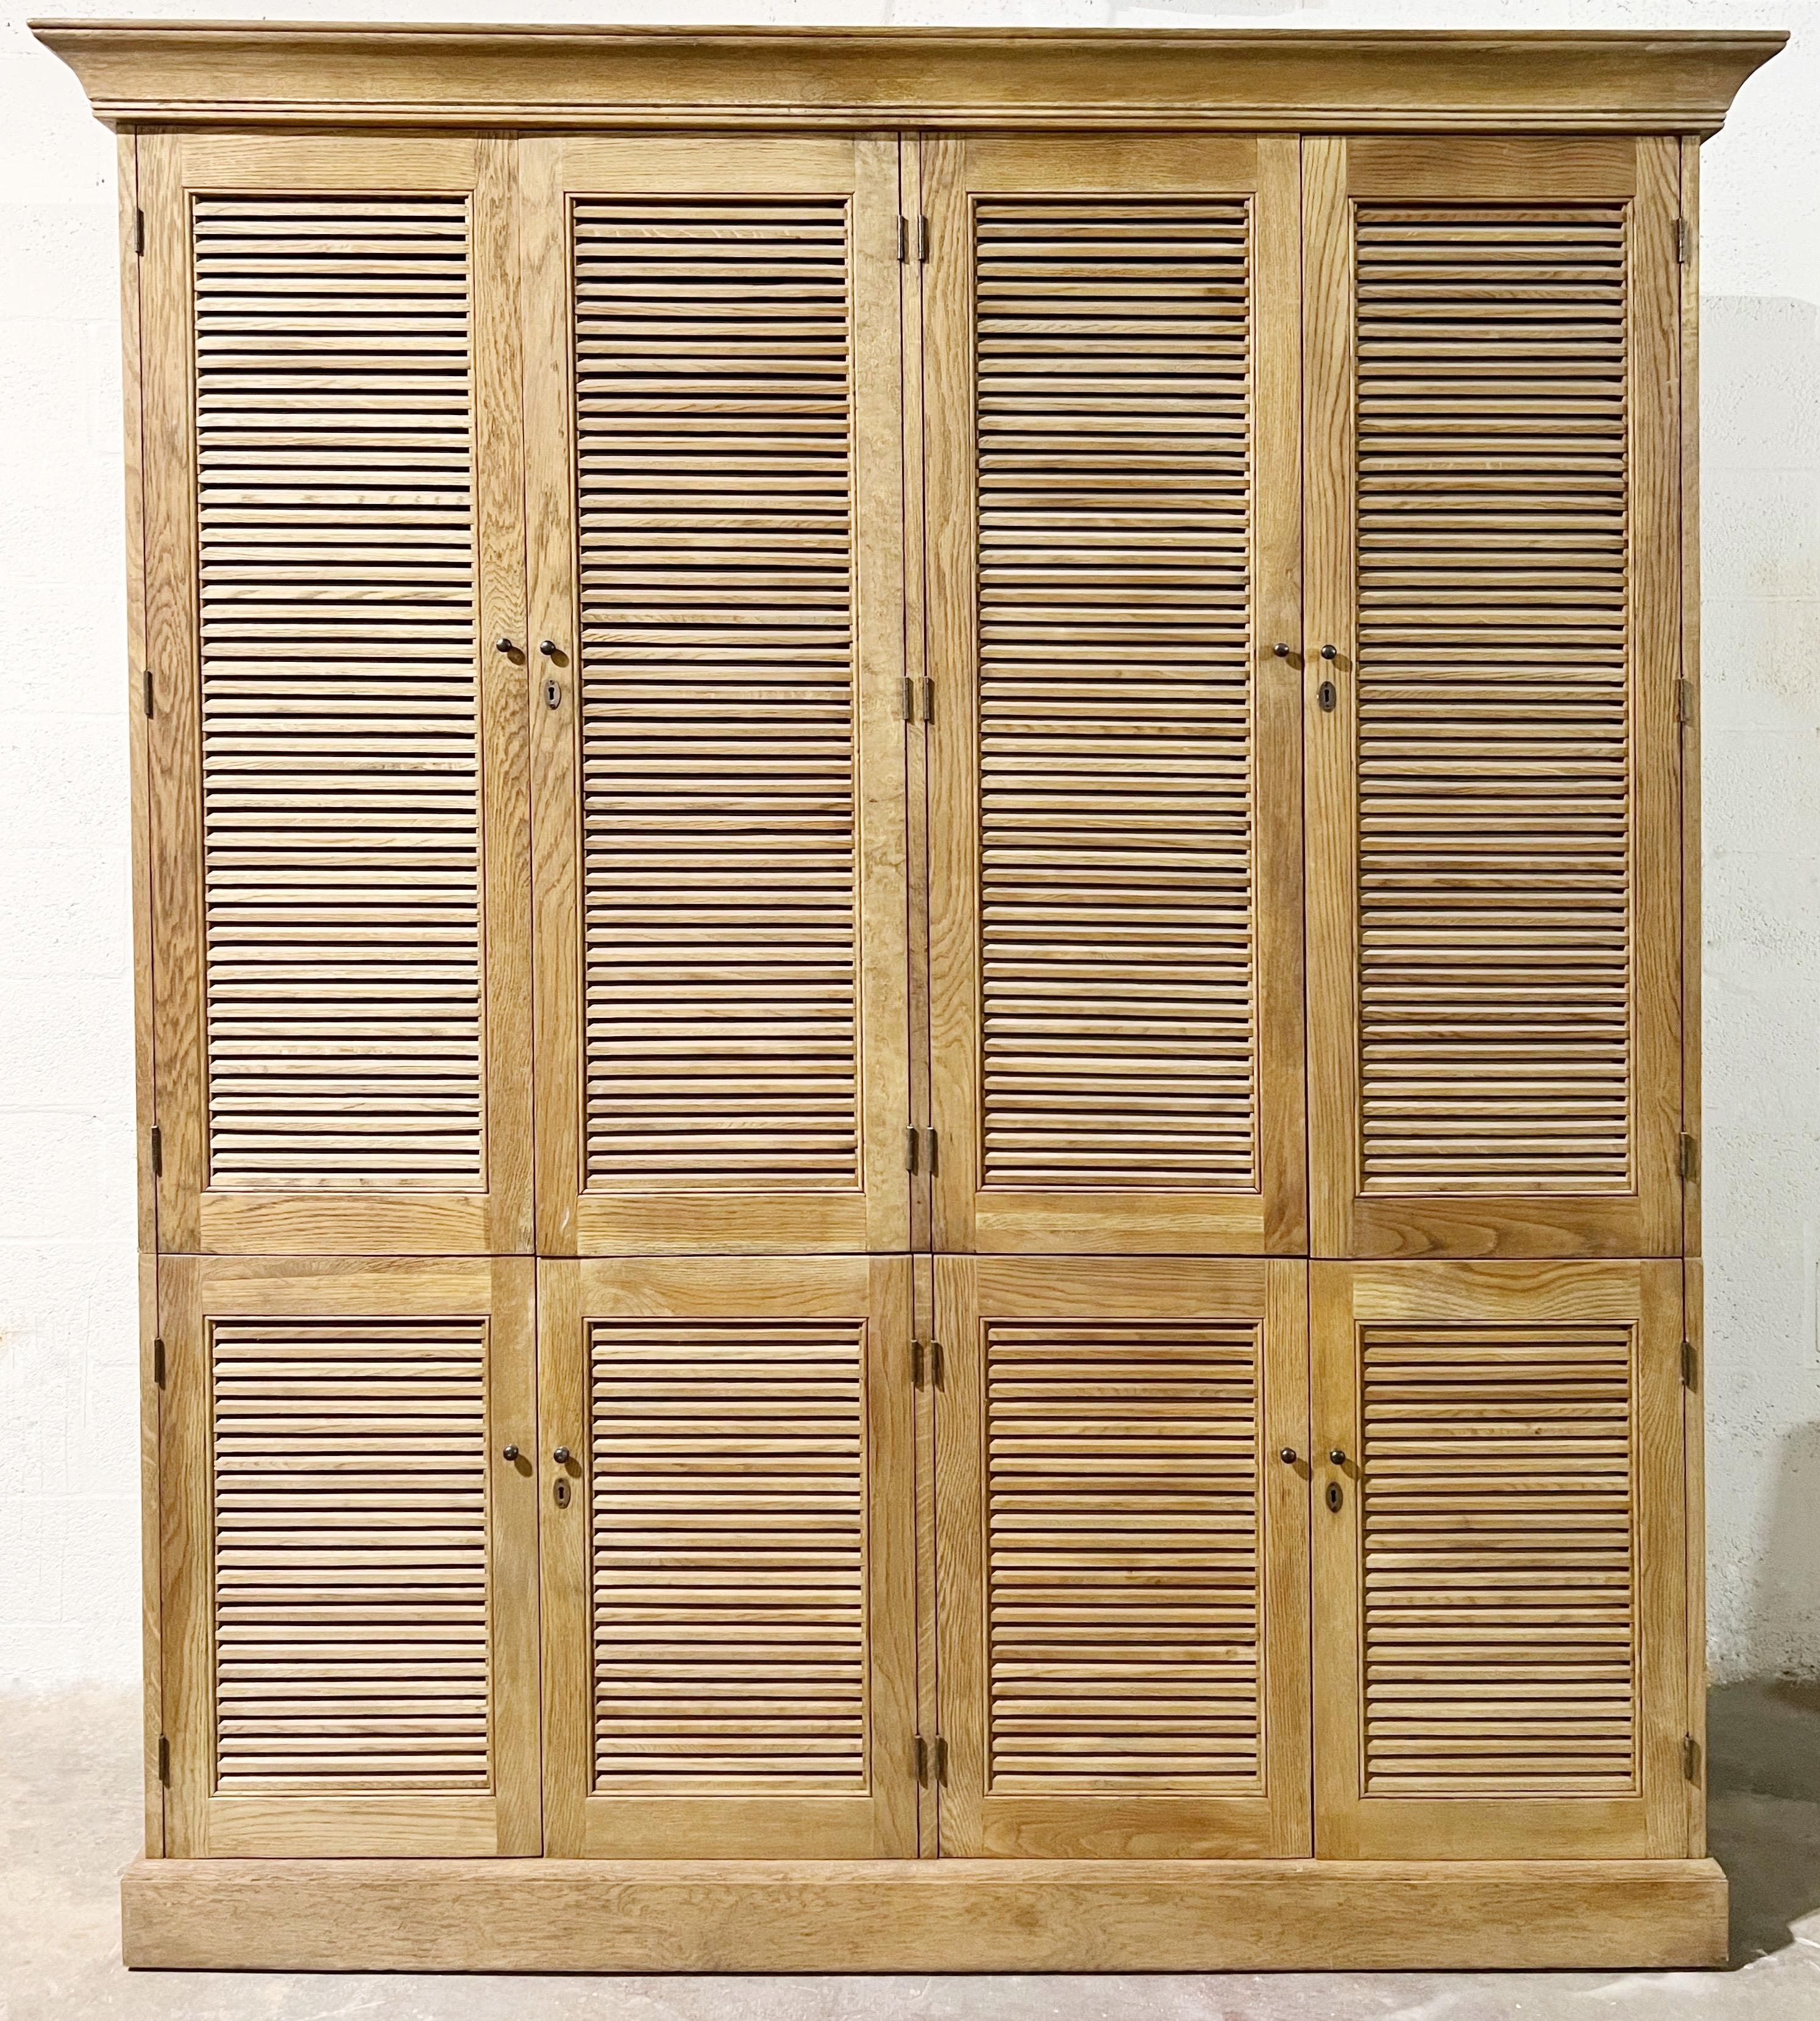 A large 2 piece wardrobe with doors with slatted design. 8 doors total. The bottom portion has 4 doors that reveal shelving. The top part accommodate shelving as well as rods for hanging. Beautifully made. Retains keys, shelves and rods.